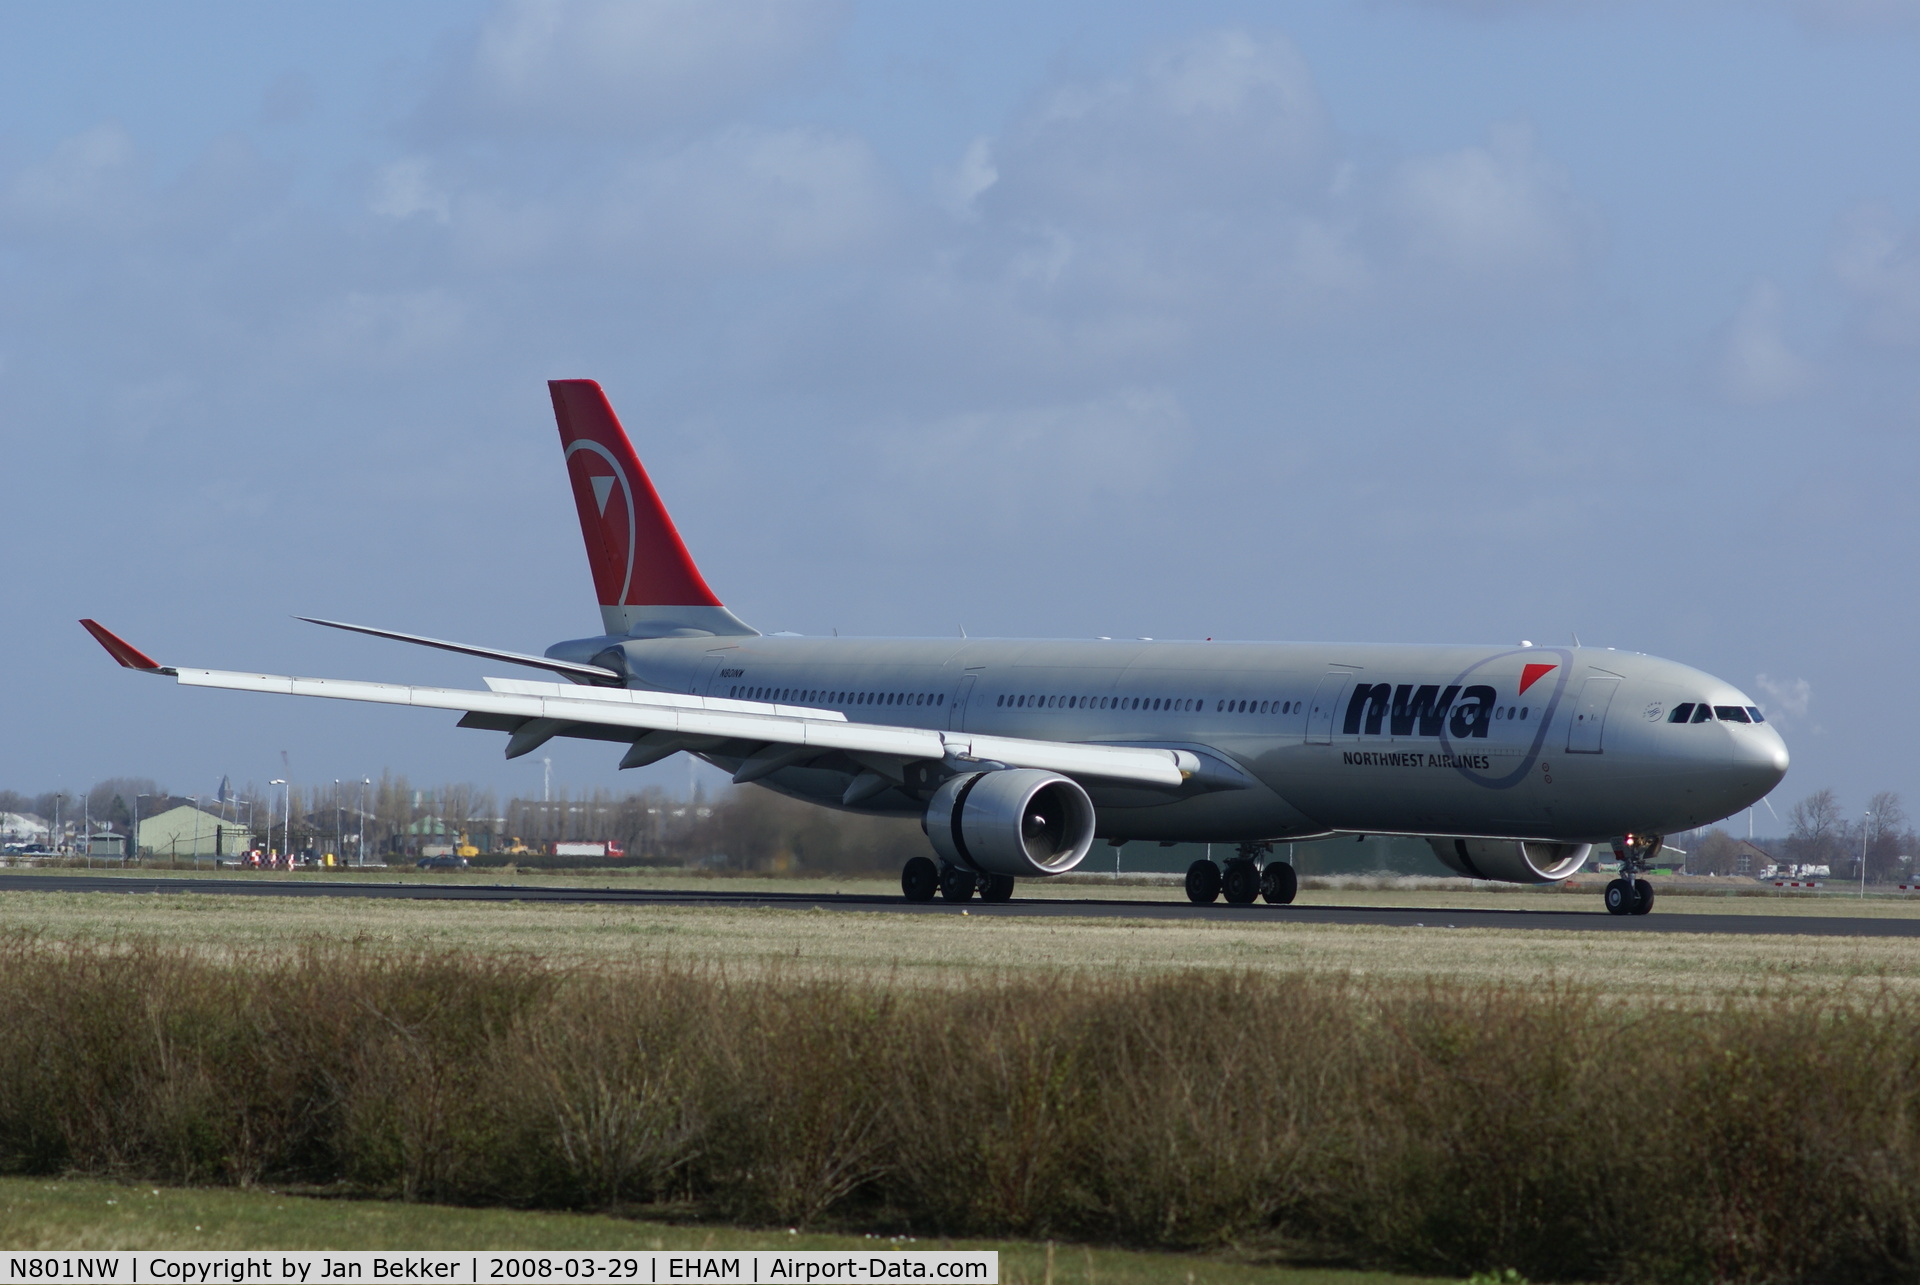 N801NW, 2003 Airbus A330-323 C/N 0524, Just after landing on the Polderbaan at Schiphol